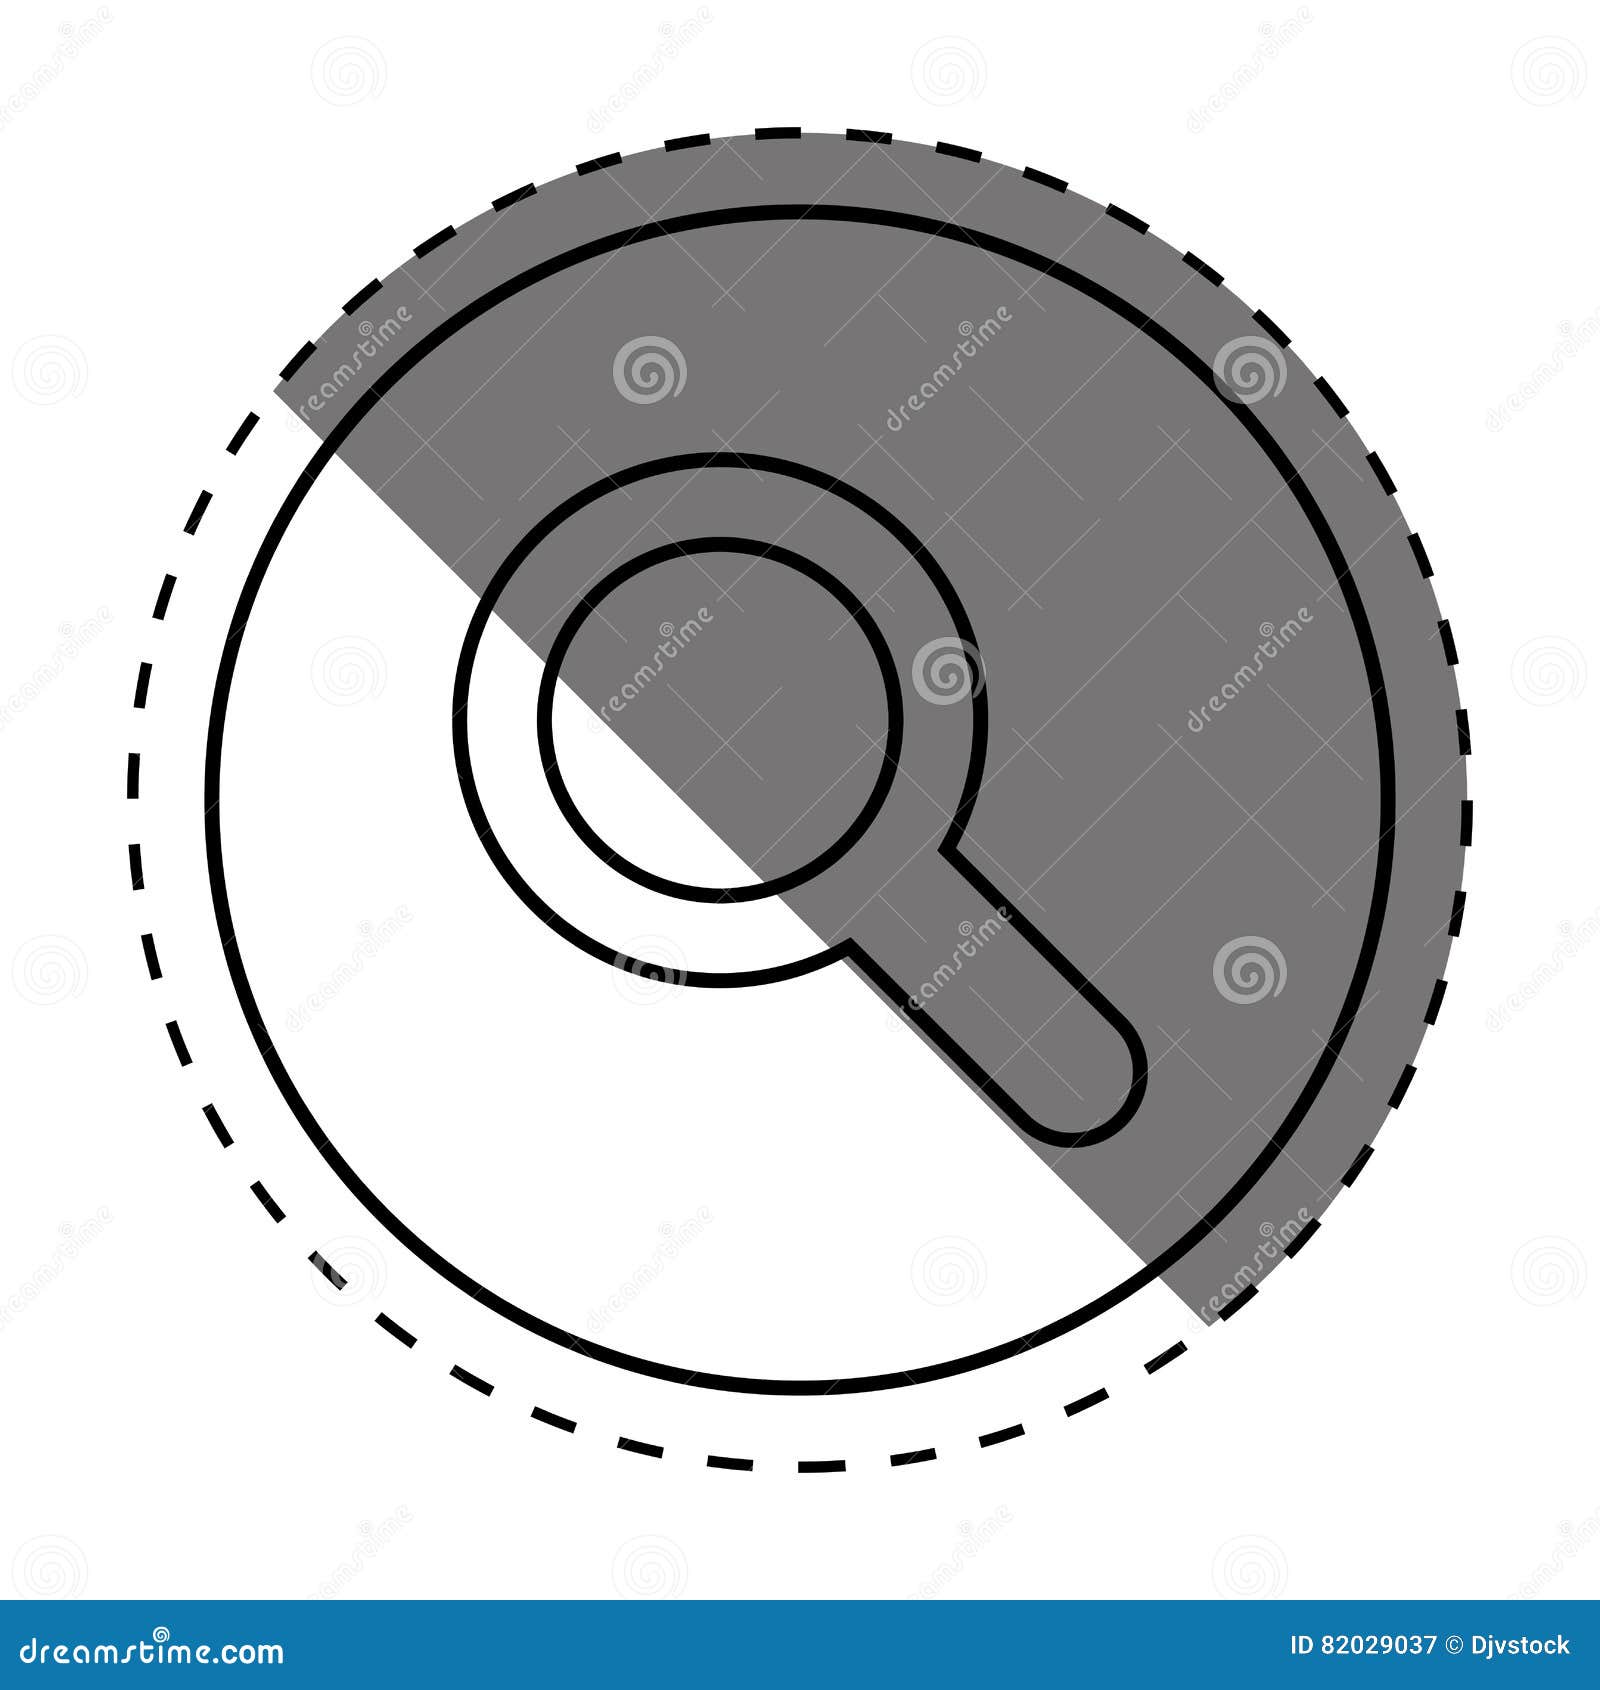 Magnifying glass lupe stock vector. Illustration of black - 82029037